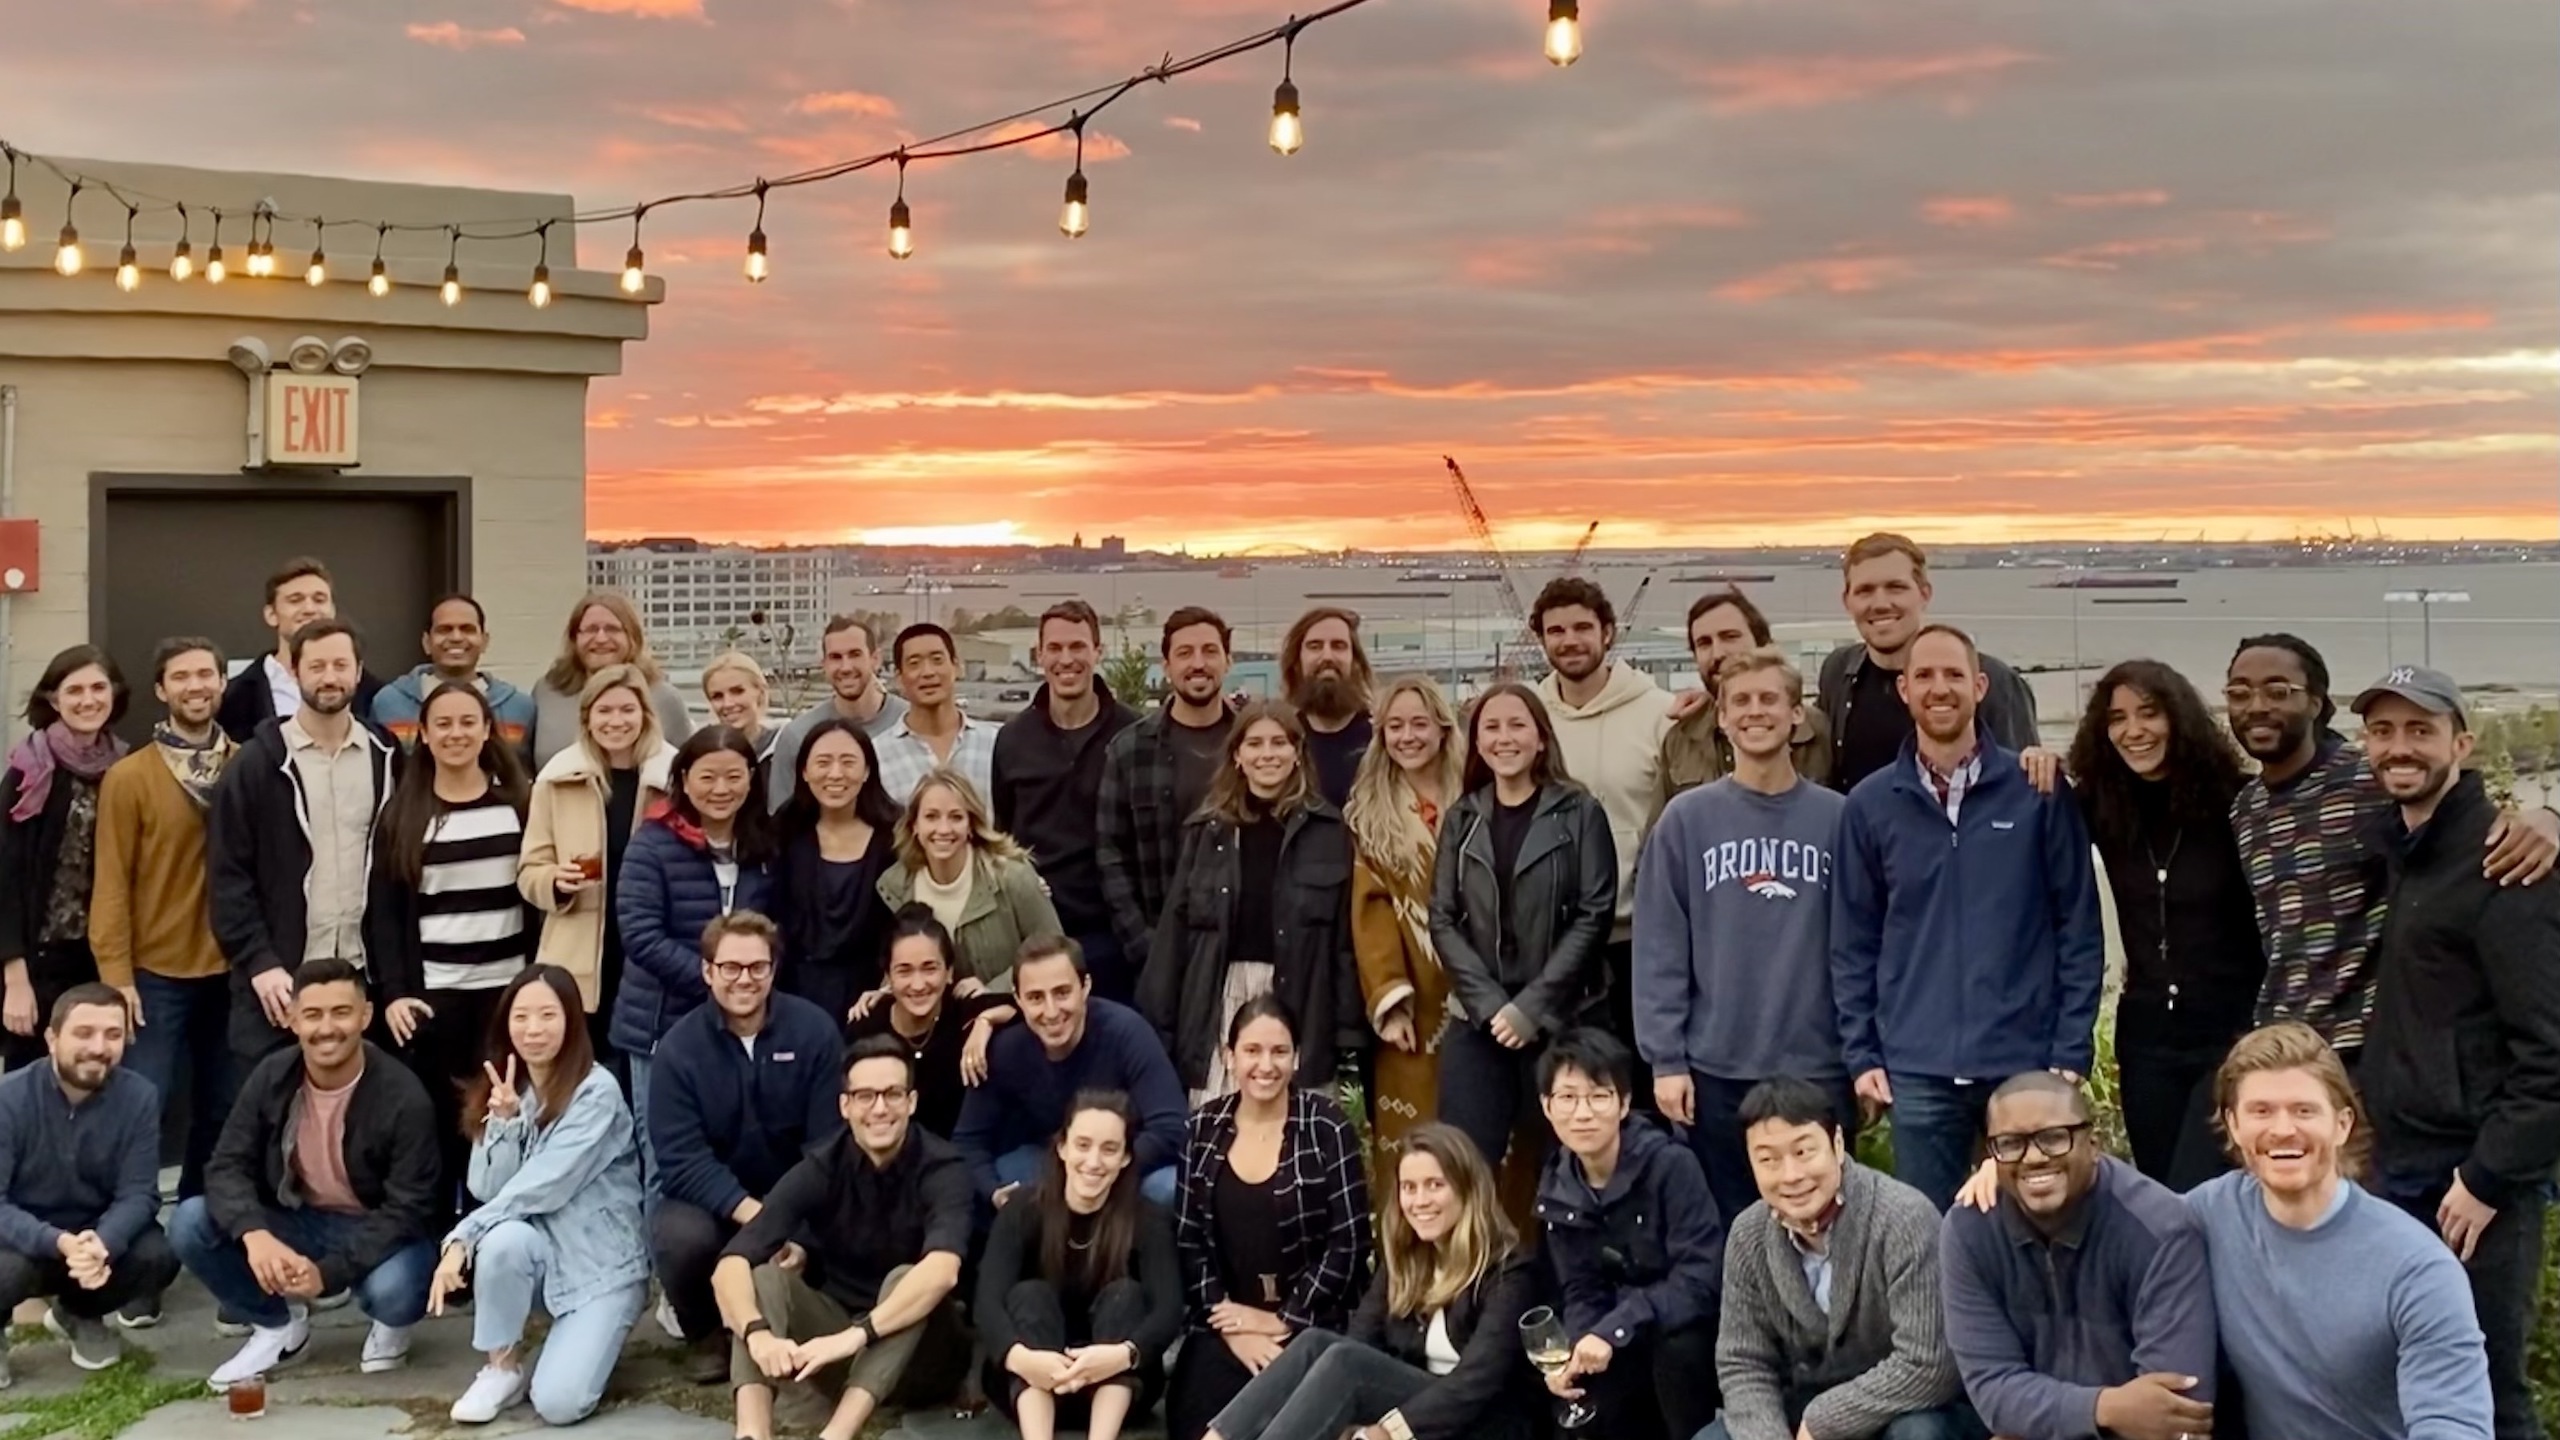 Ethic employees pose for a group photo on a rooftop at sunset. 